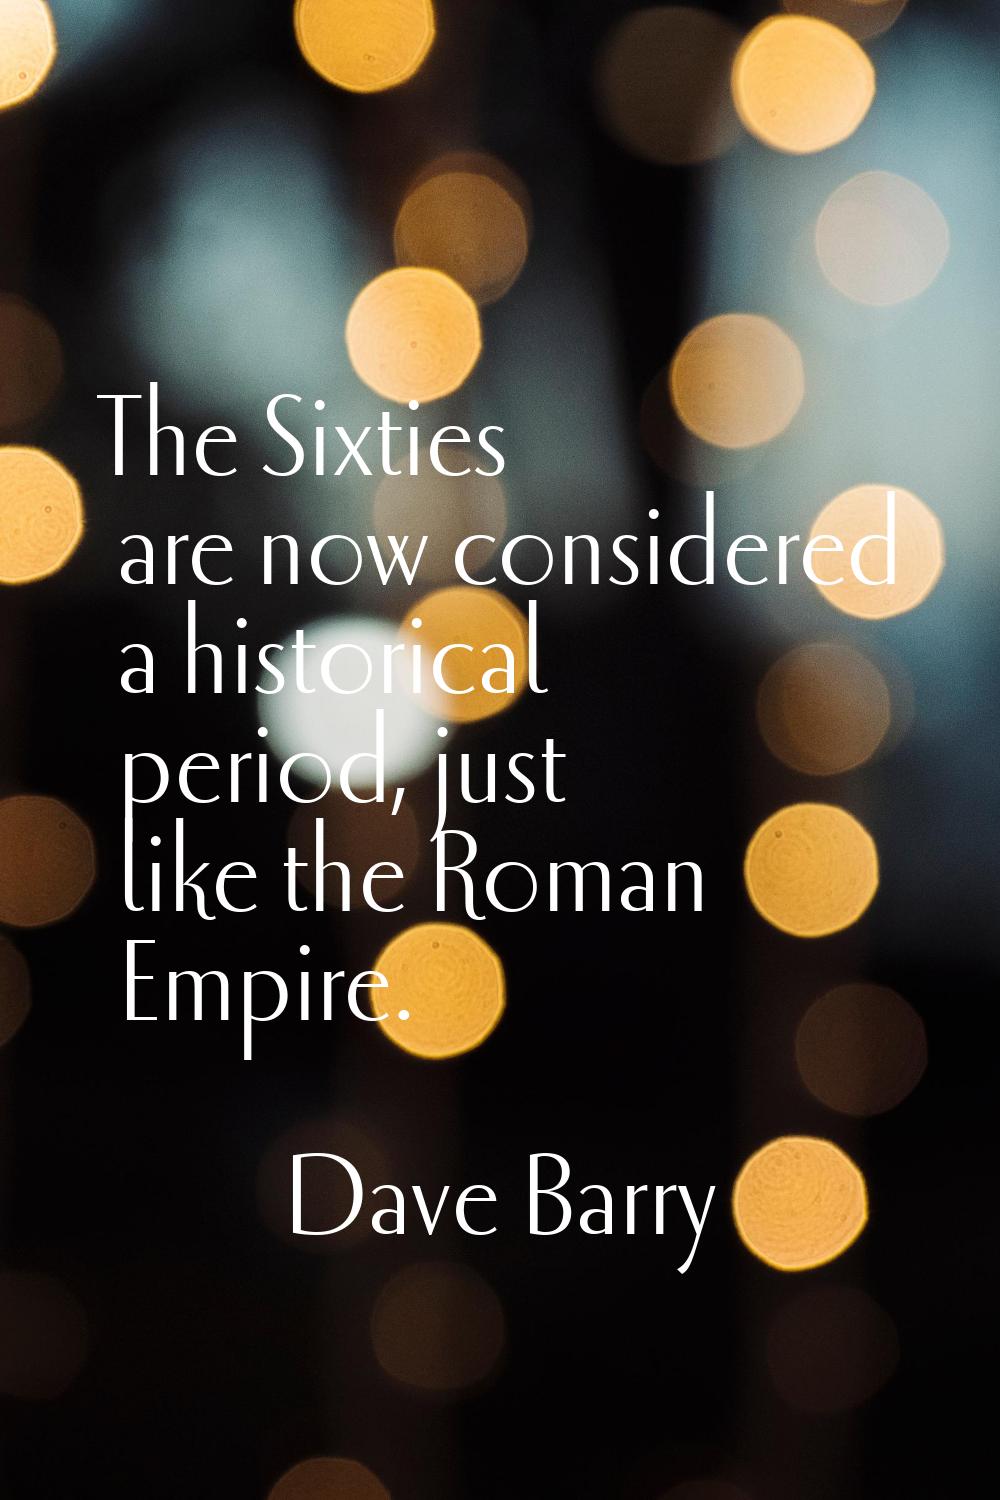 The Sixties are now considered a historical period, just like the Roman Empire.